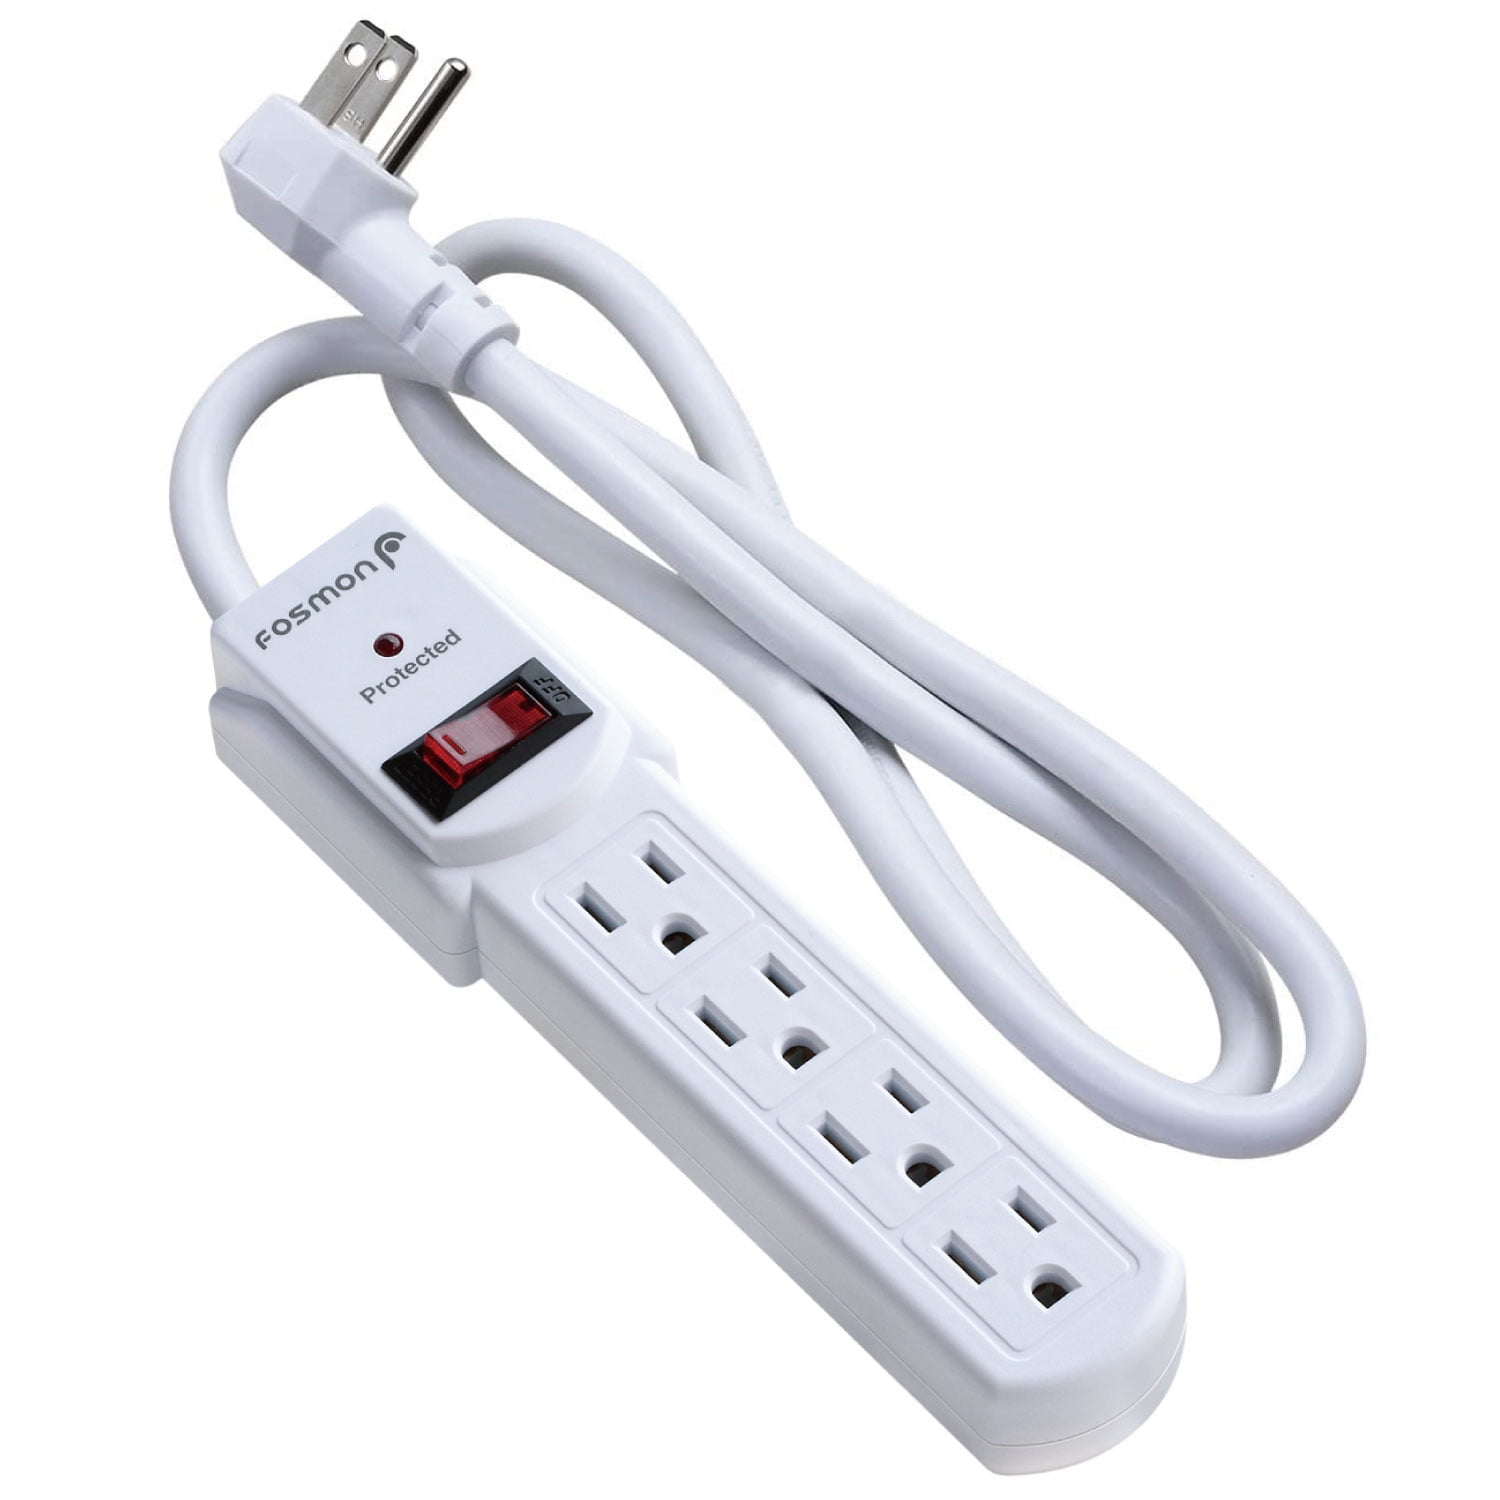 Extension Cord 3 Outlet Power Strip 1.5 Ft Grounded Office Home 125V 60Hz 13A